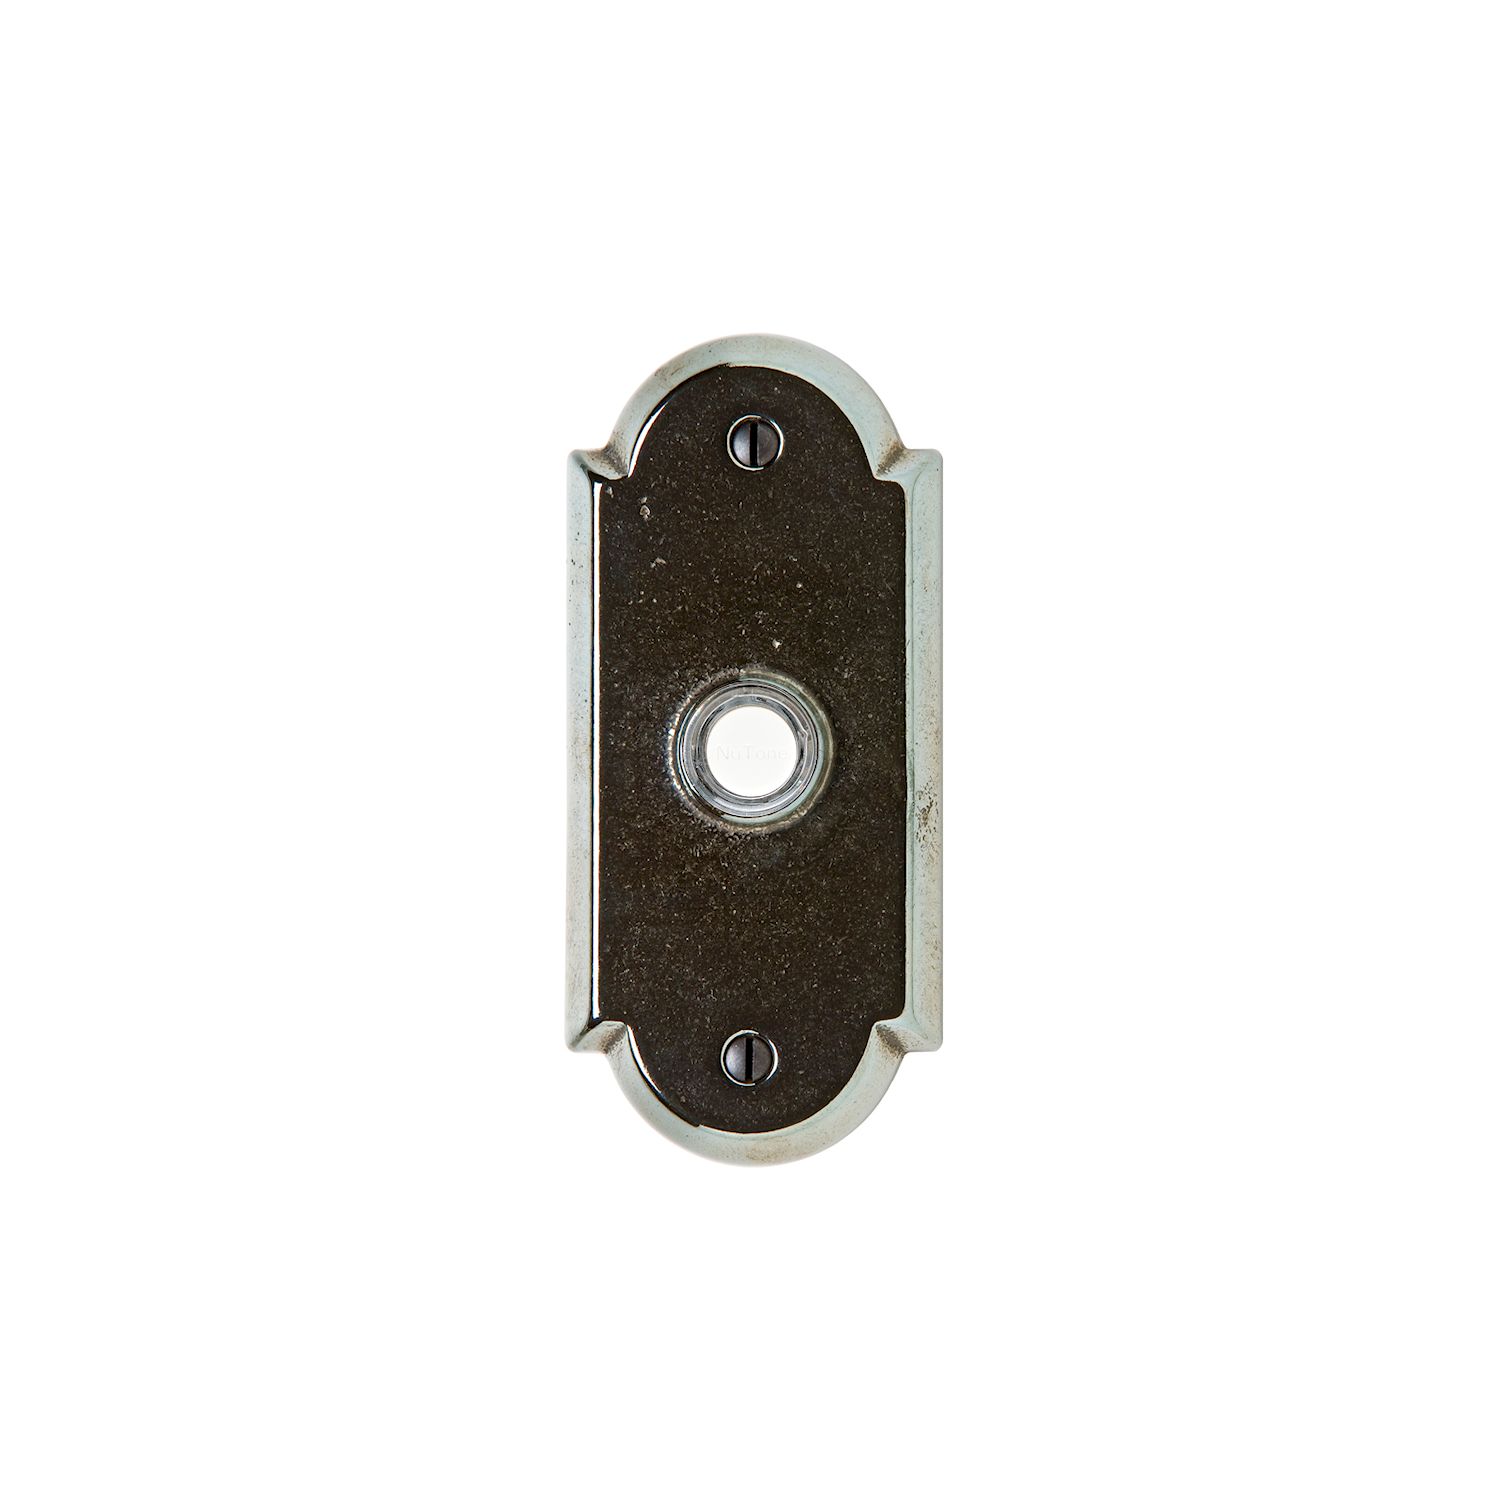 Arched Doorbell Button - 2 1/2 x 5 1/2